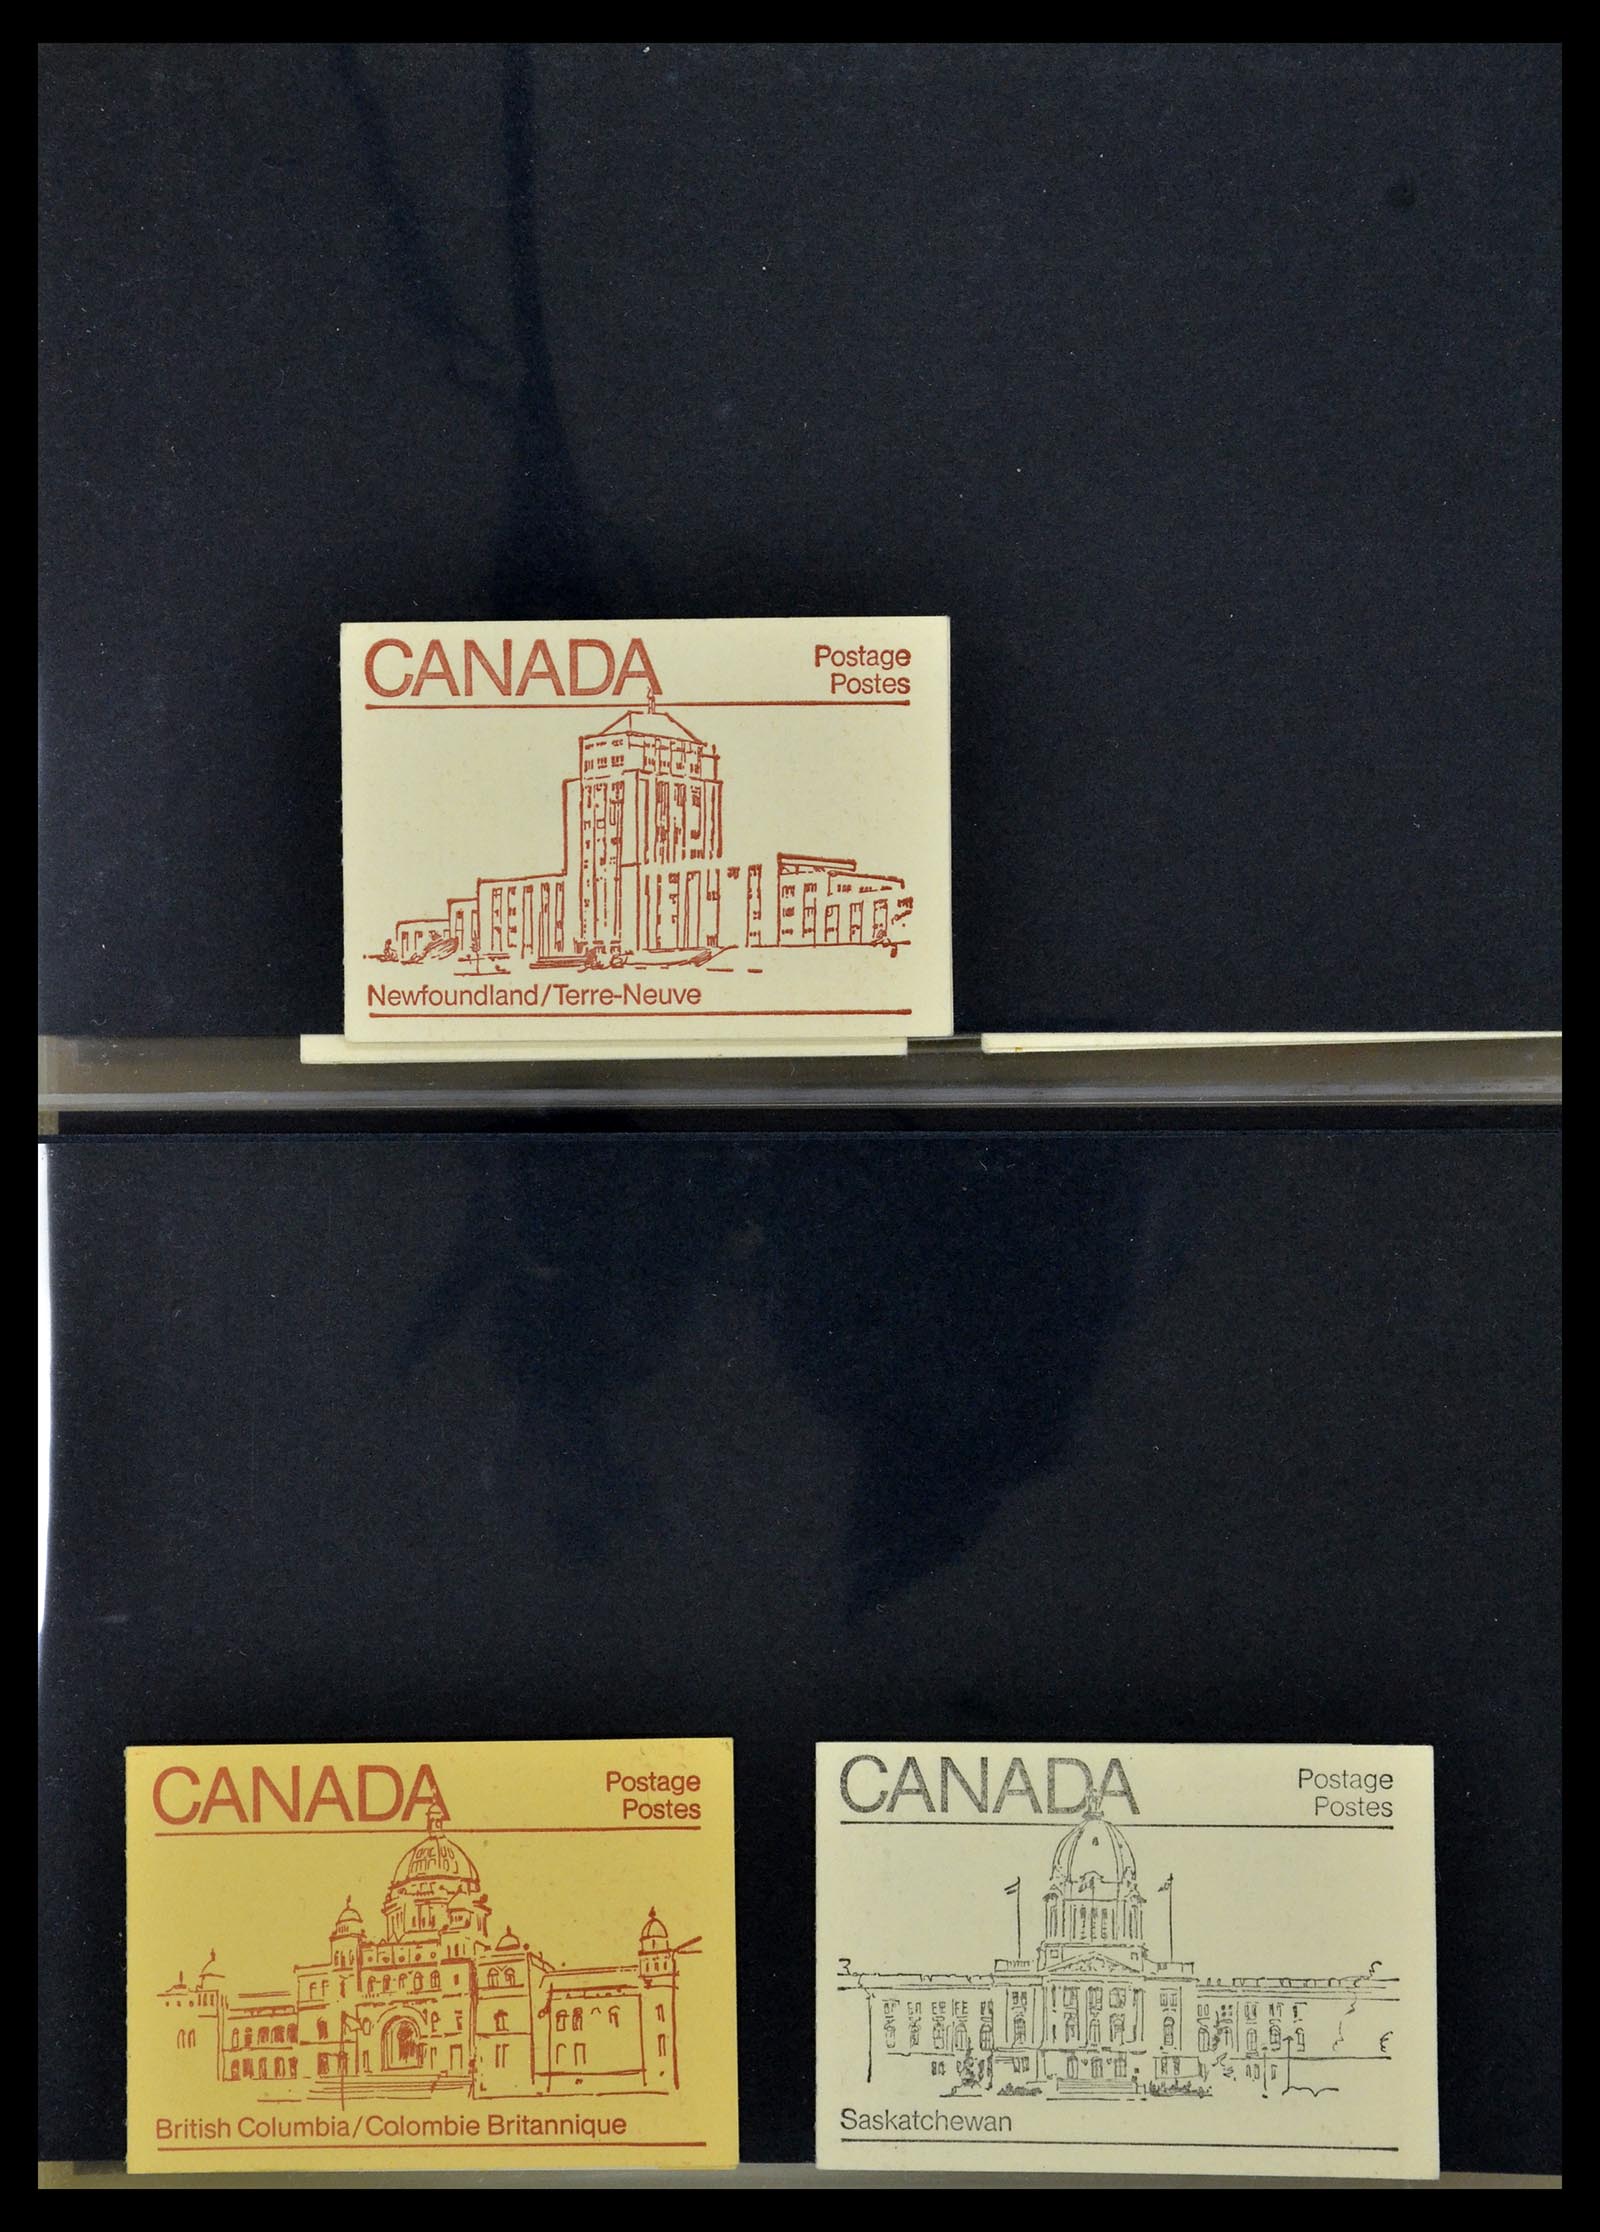 35106 019 - Stamp Collection 35106 Canada stamp booklets 1942-2000.